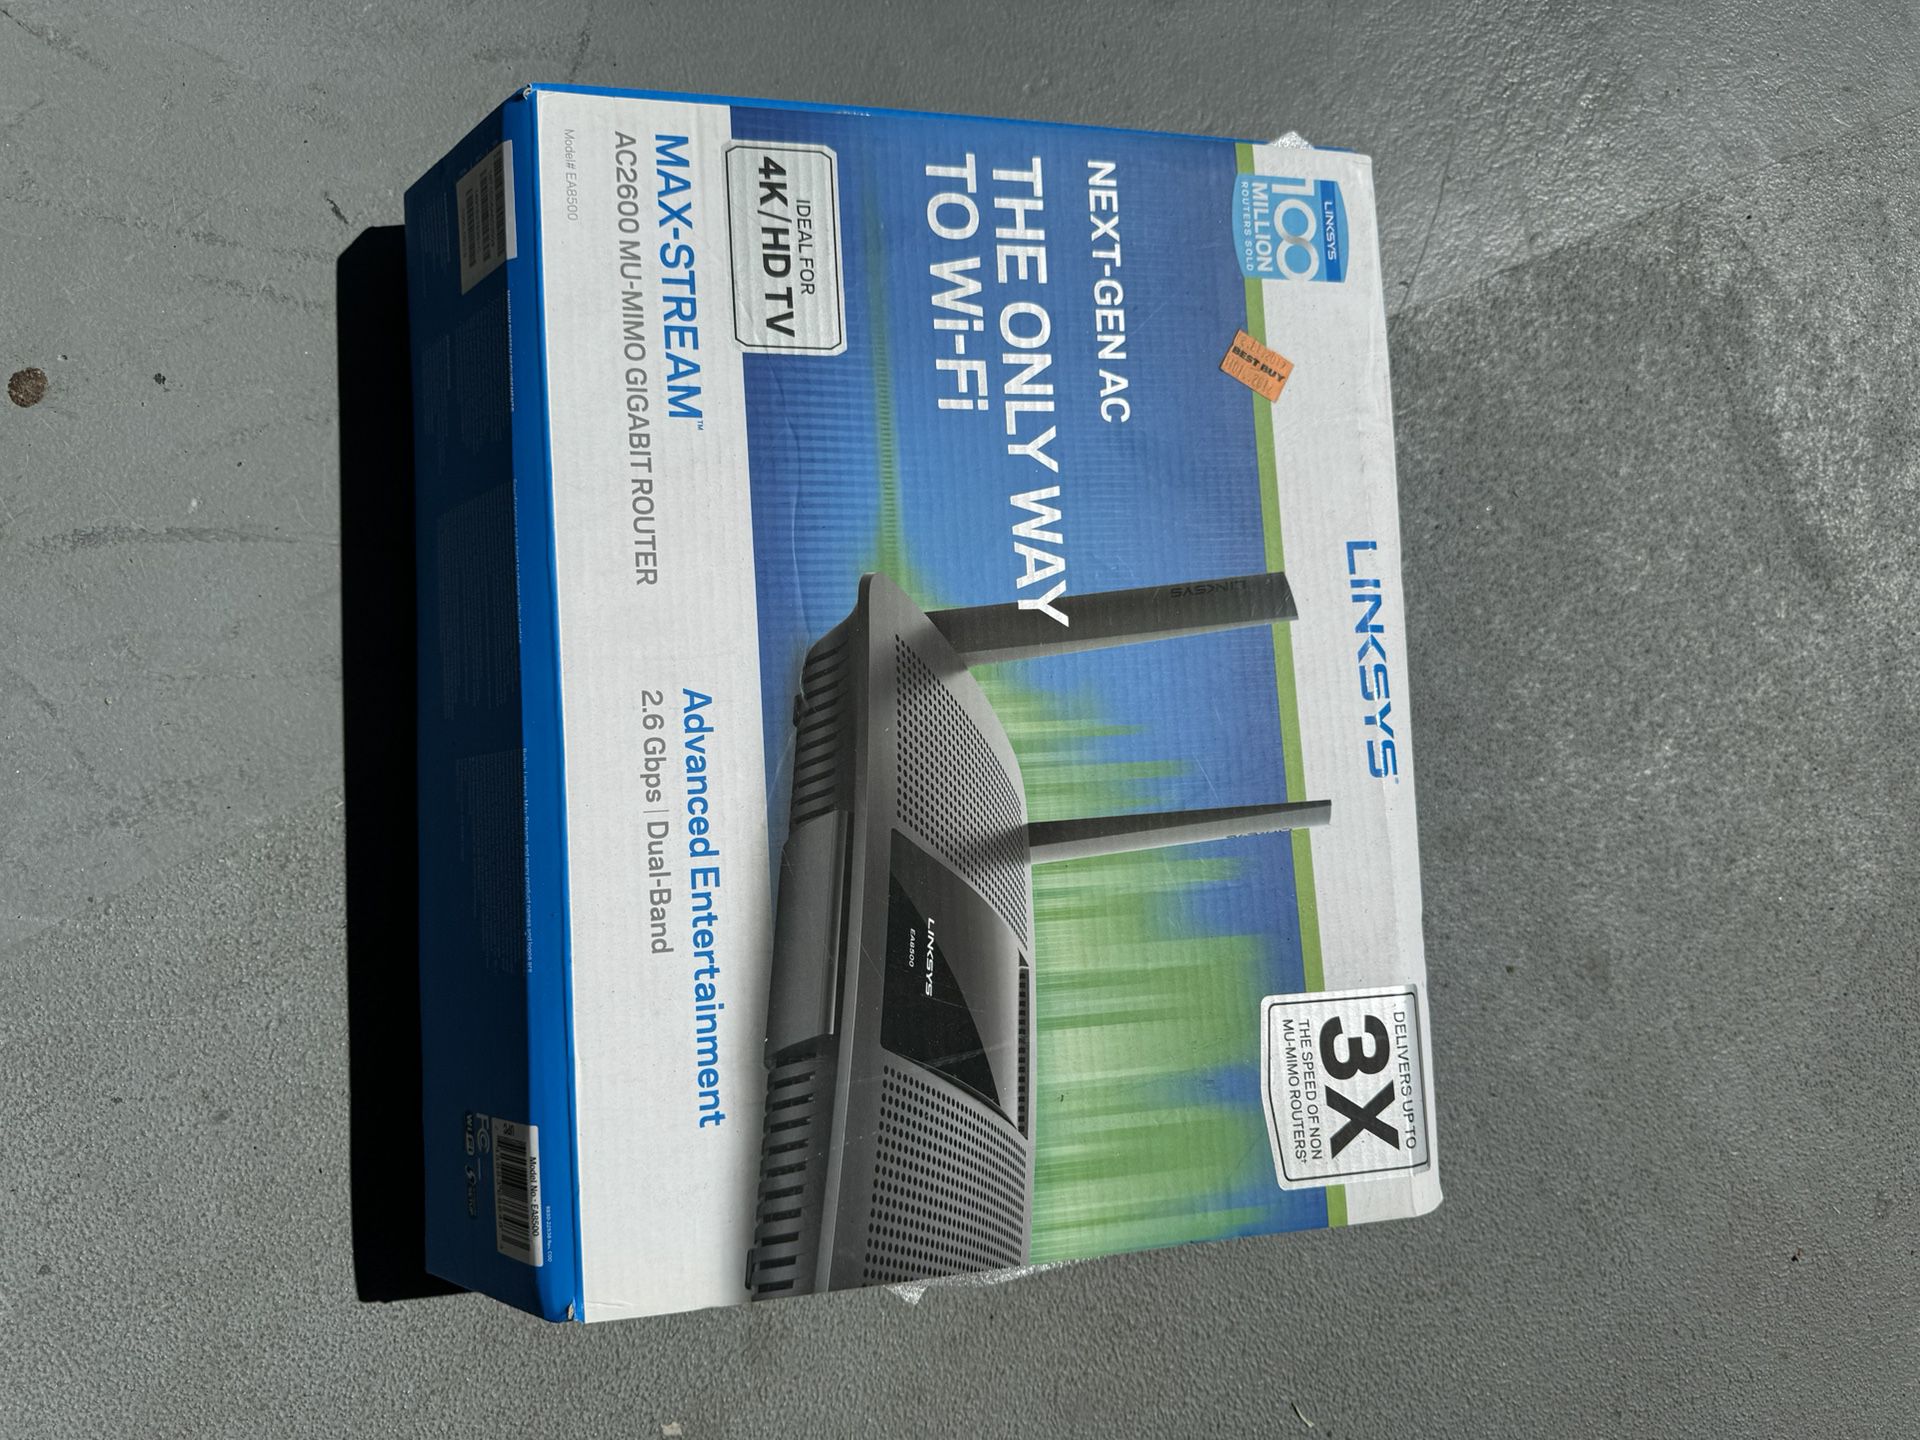 LINKSYS Internet Router